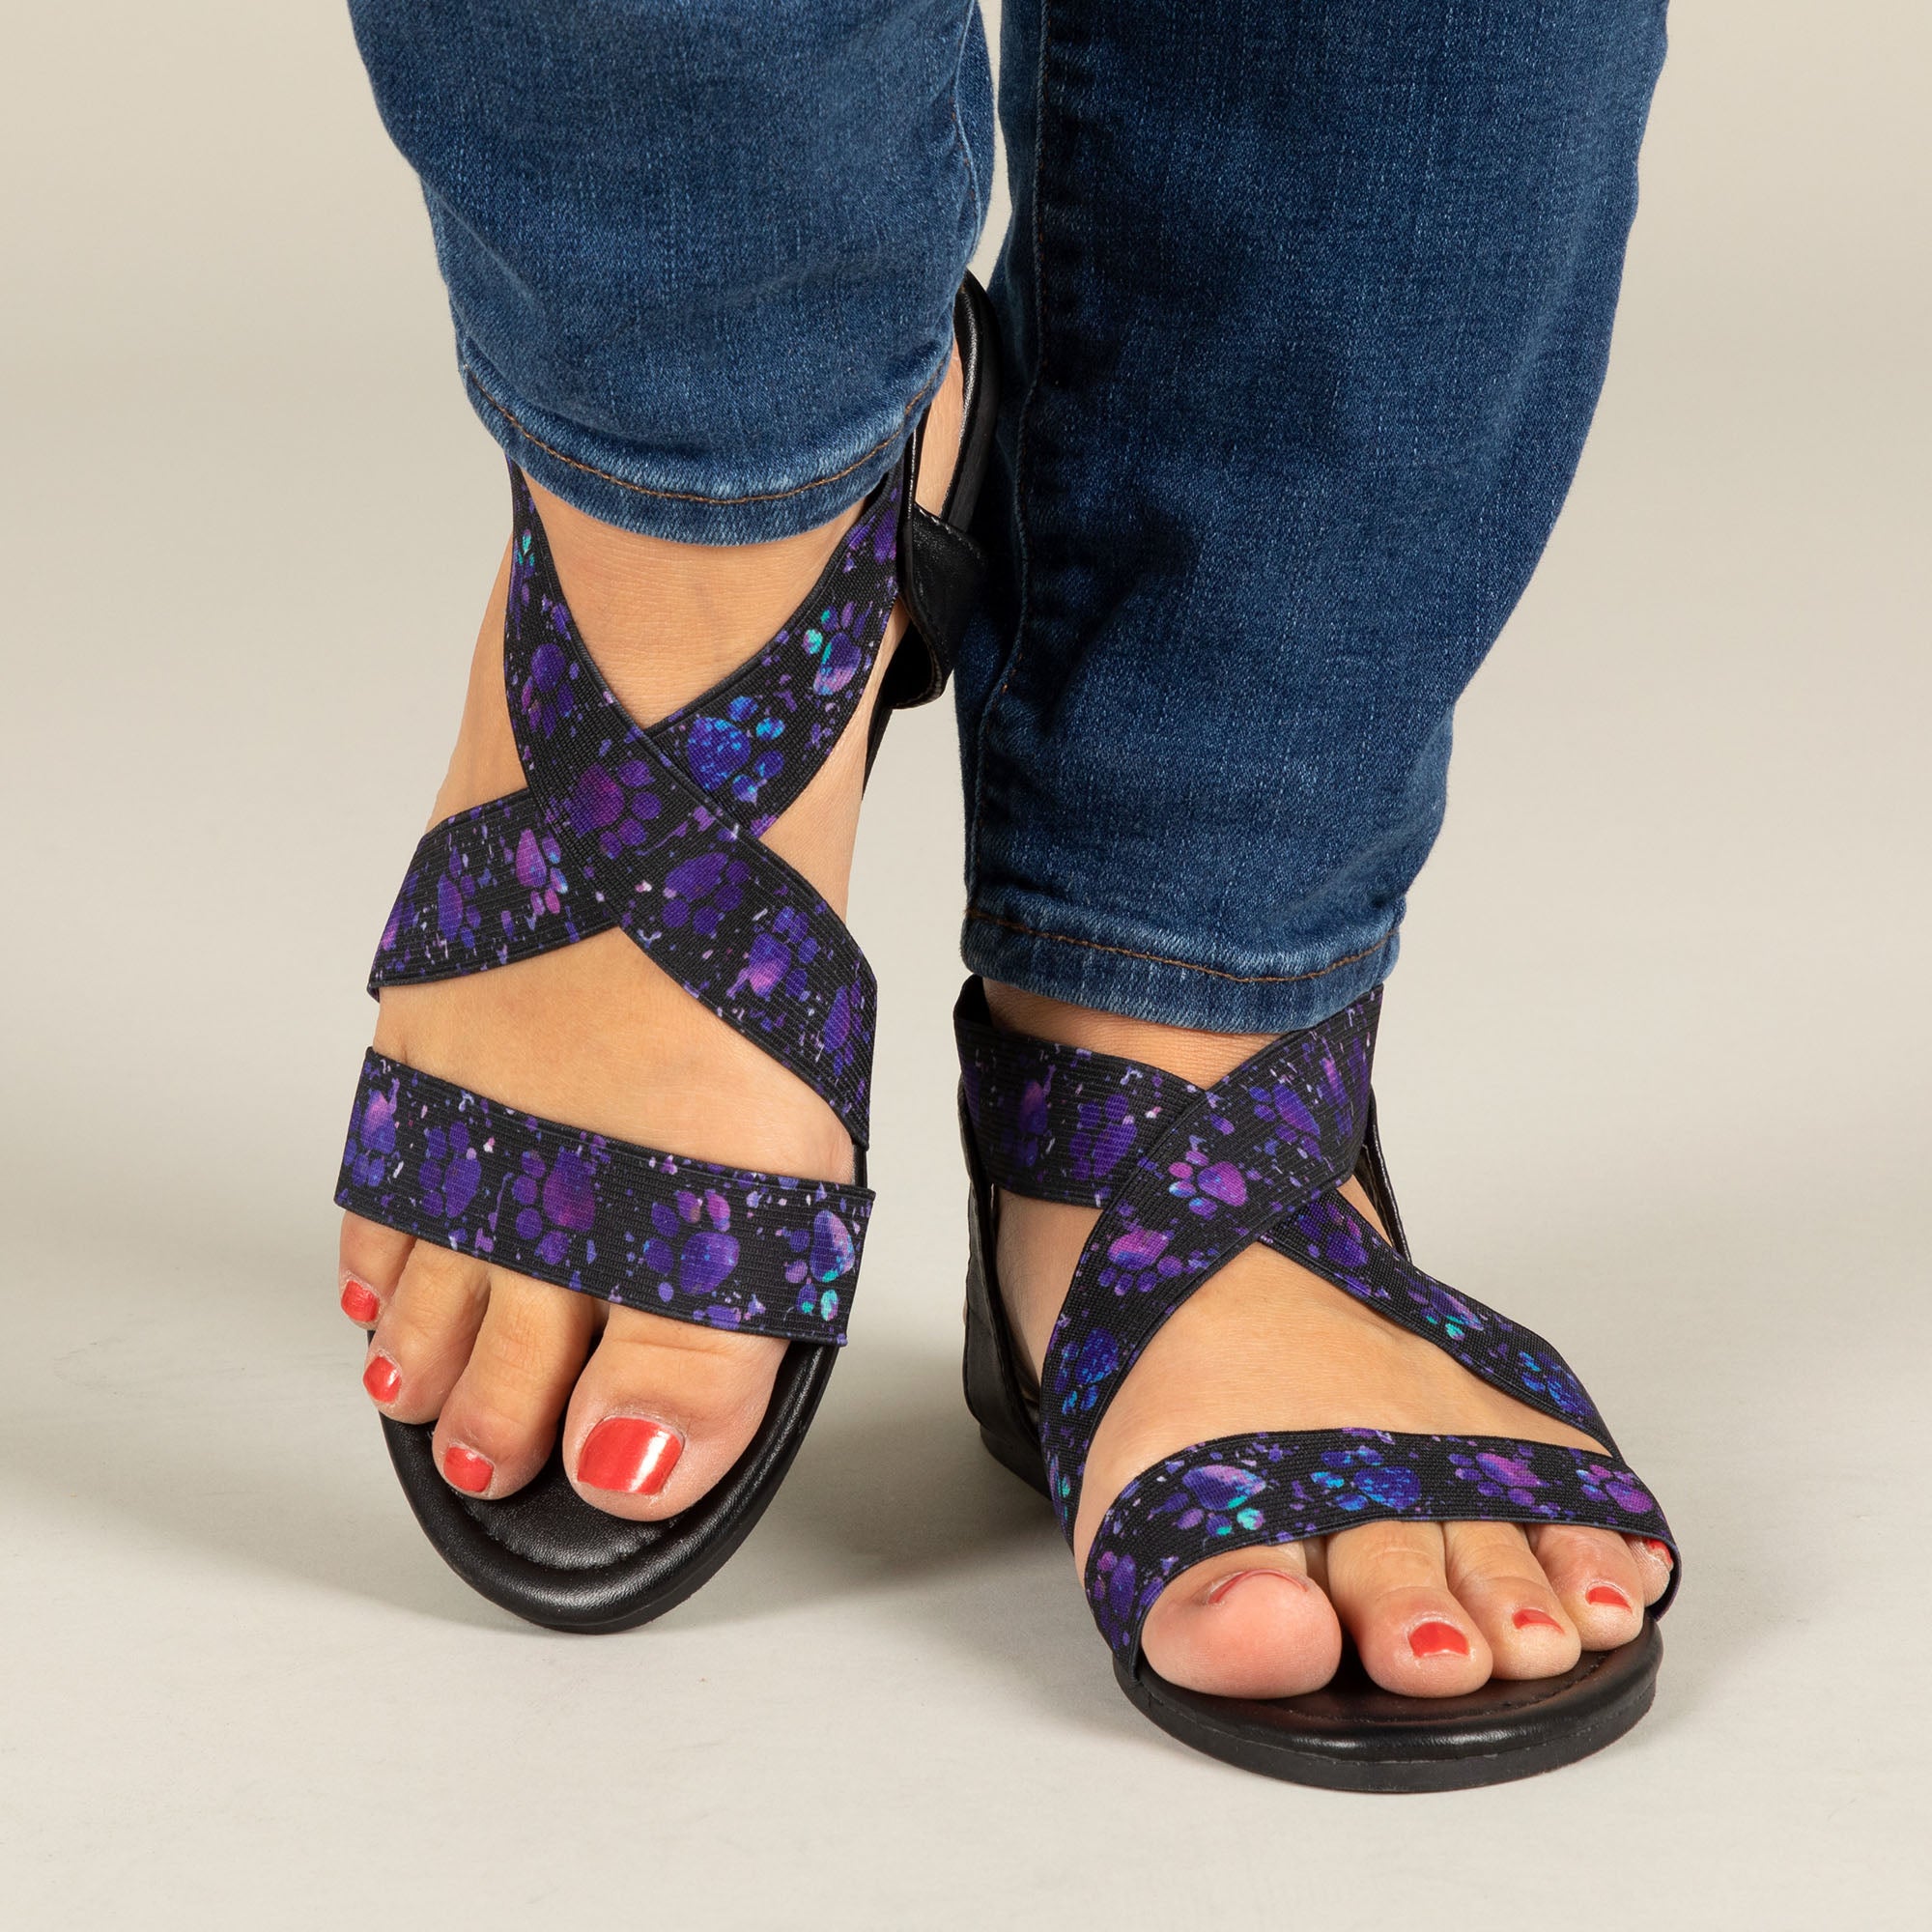 Pawsitively Stretchy Sandals - Painted Paws - 10